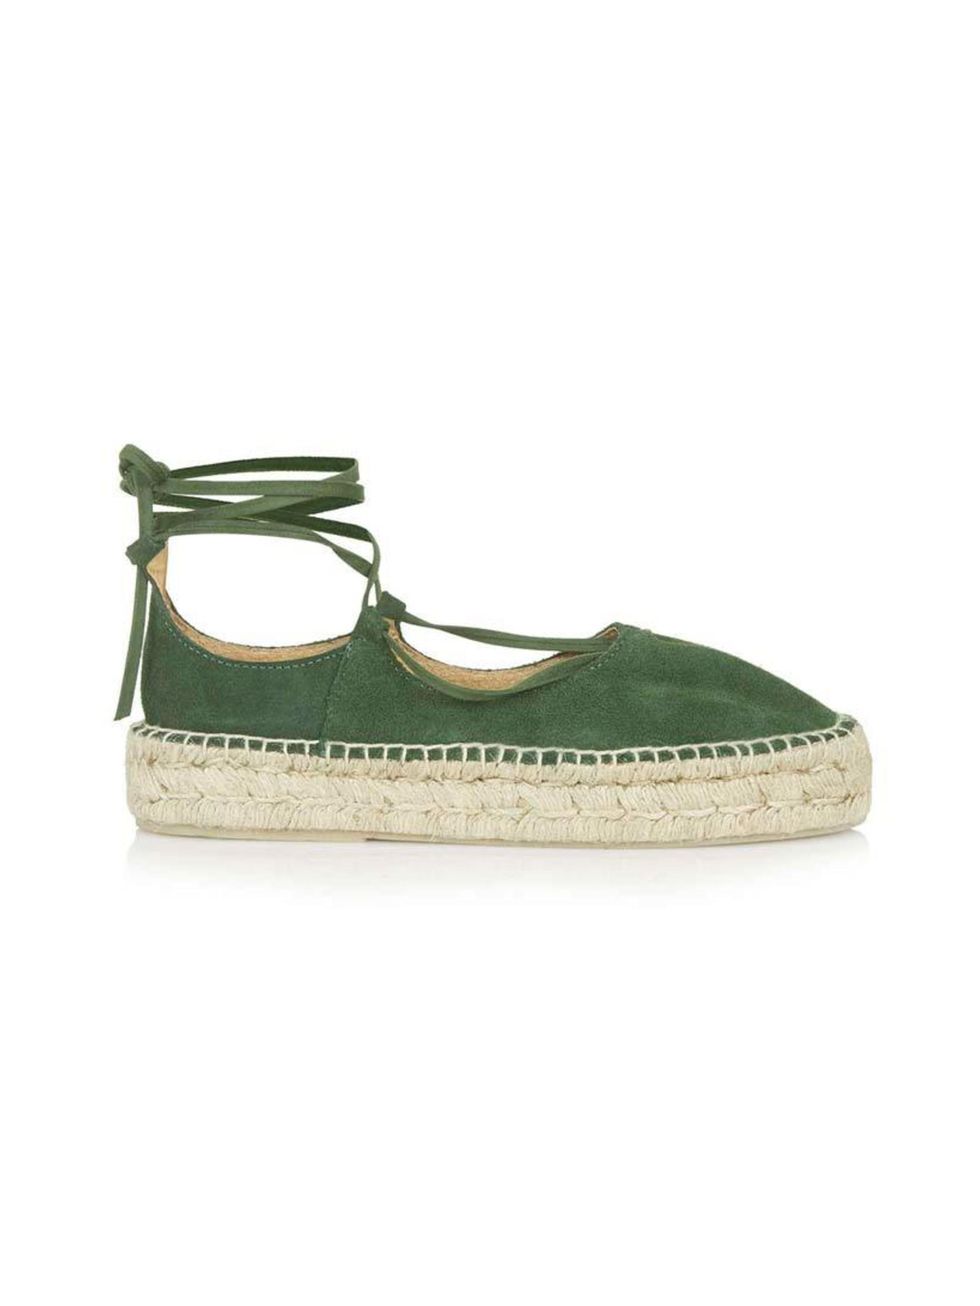 <p>Pair with pale denim or a simple black sundress.</p>

<p><a href="http://www.topshop.com/en/tsuk/product/new-in-this-week-2169932/new-in-this-week-493/kingfisher-espadrilles-4512526?bi=1&ps=200" target="_blank">Topshop</a> espadrilles, £55</p>